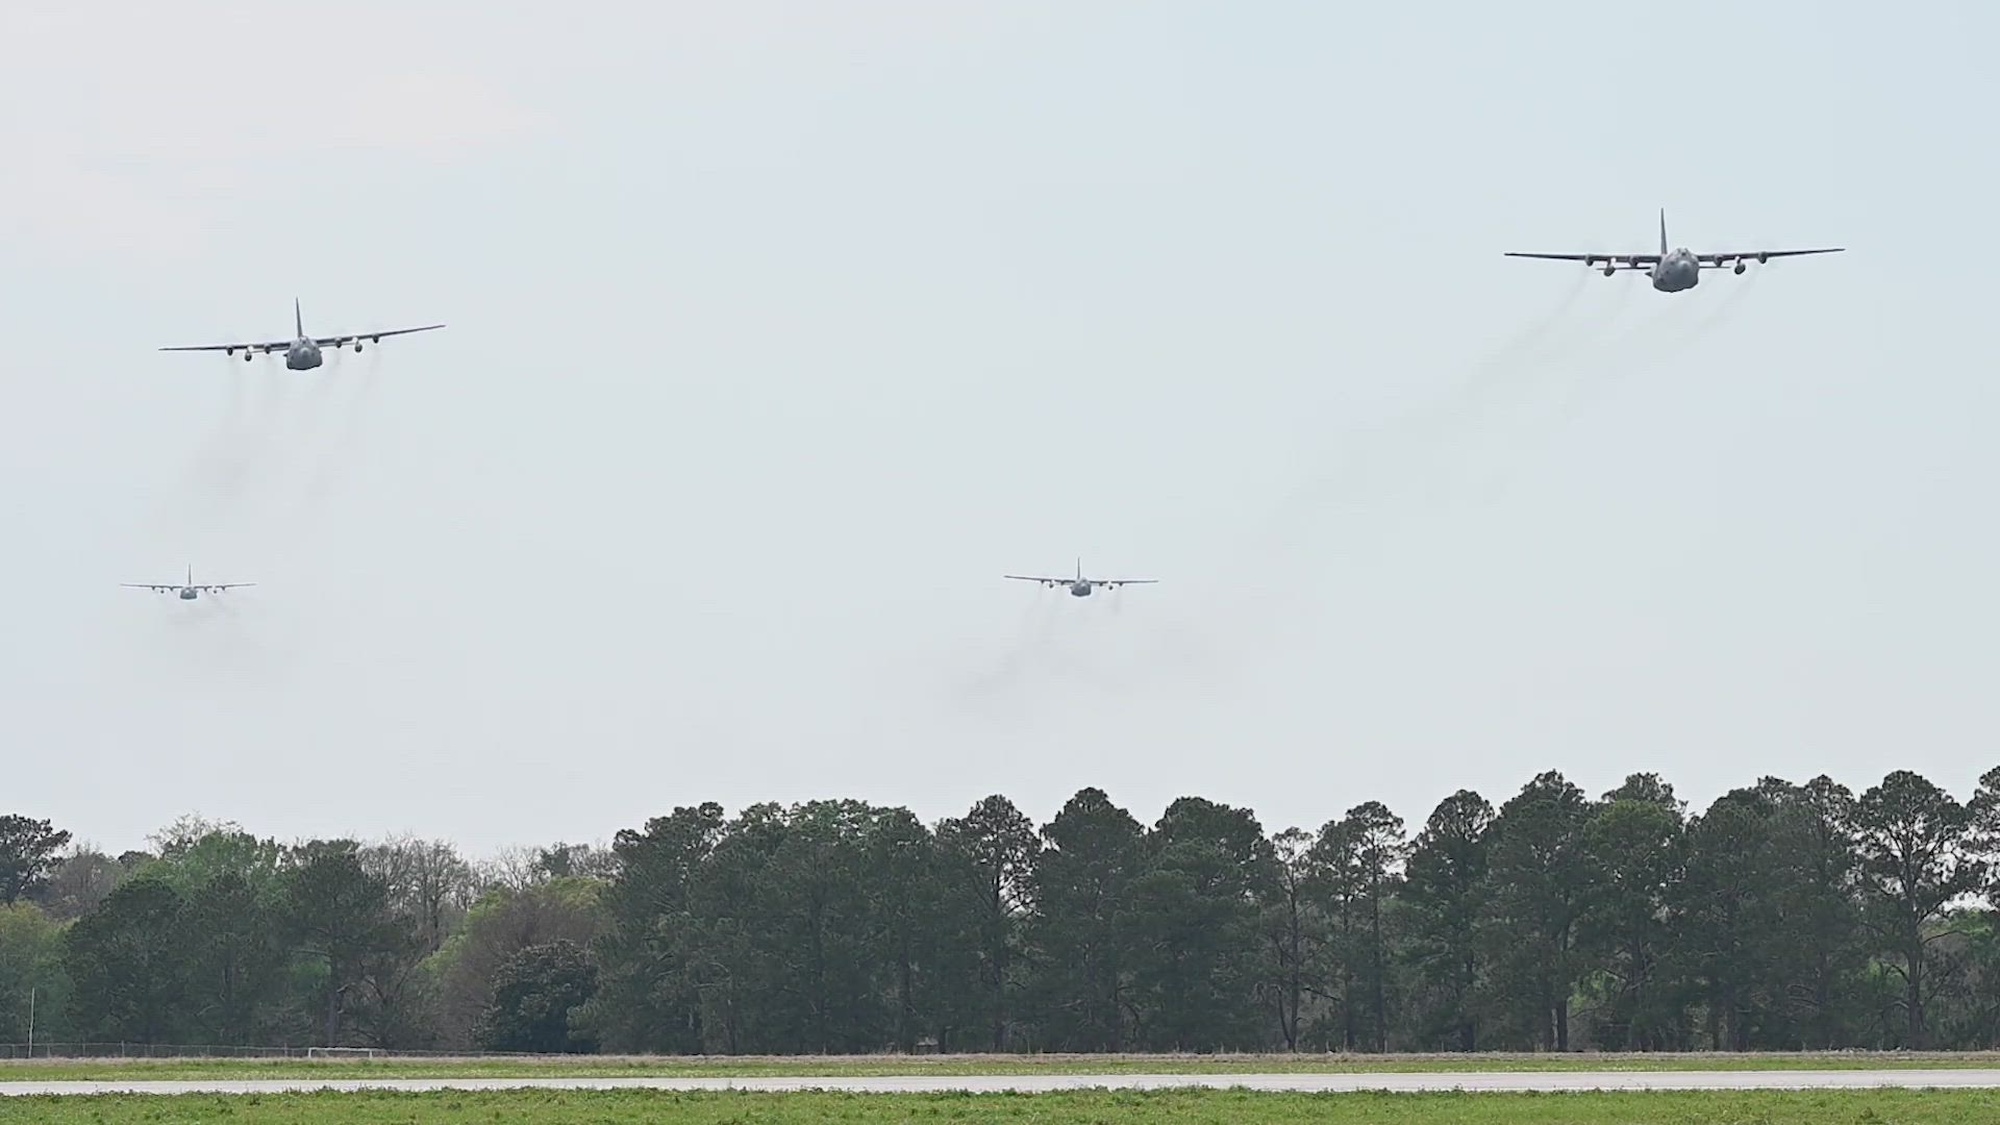 The 908th Airlift Wing concluded its final flights with the C-130H Hercules aircraft as it’s assigned platform Saturday, April 2, 2020 after nearly 40 years of service.

The 908th was selected to divest their C-130 fleet in anticipation of a mission change to the formal training unit for the MH-139A Grey Wolf helicopter.

The 908th AW was named as the preferred location to host the MH-139 FTU Nov. 20, 2020 and is still awaiting a final basing decision.
(U.S. Air Force video by Senior Airman Shelby Thurman)